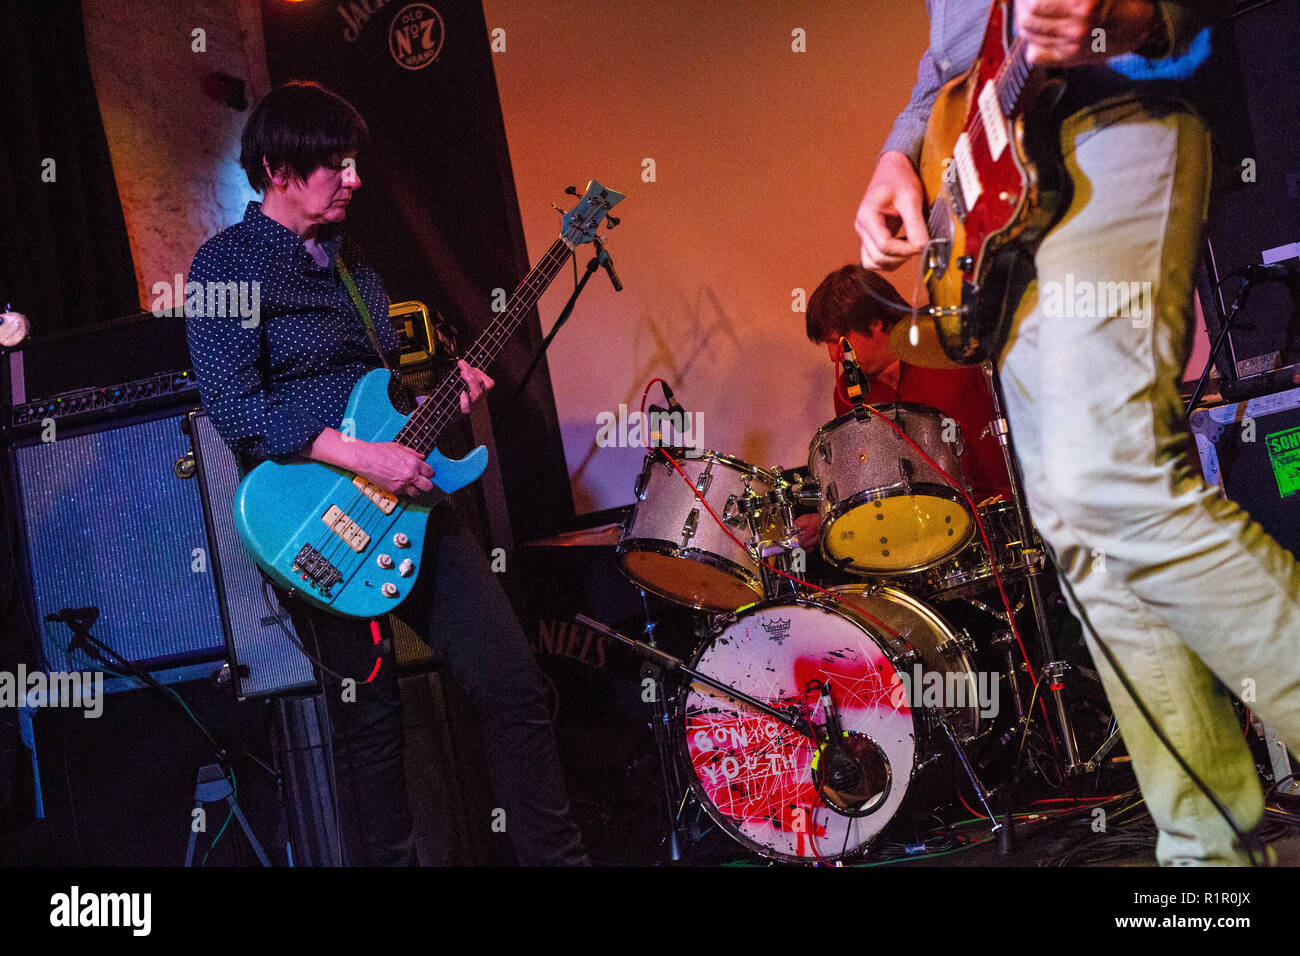 Thurston Moore (Debbie Googe, Thurston Moore Band, Thurston Moore Group, ex Sonic Youth) - May 2015 - Cluny Newcastle - Live concert photography Stock Photo